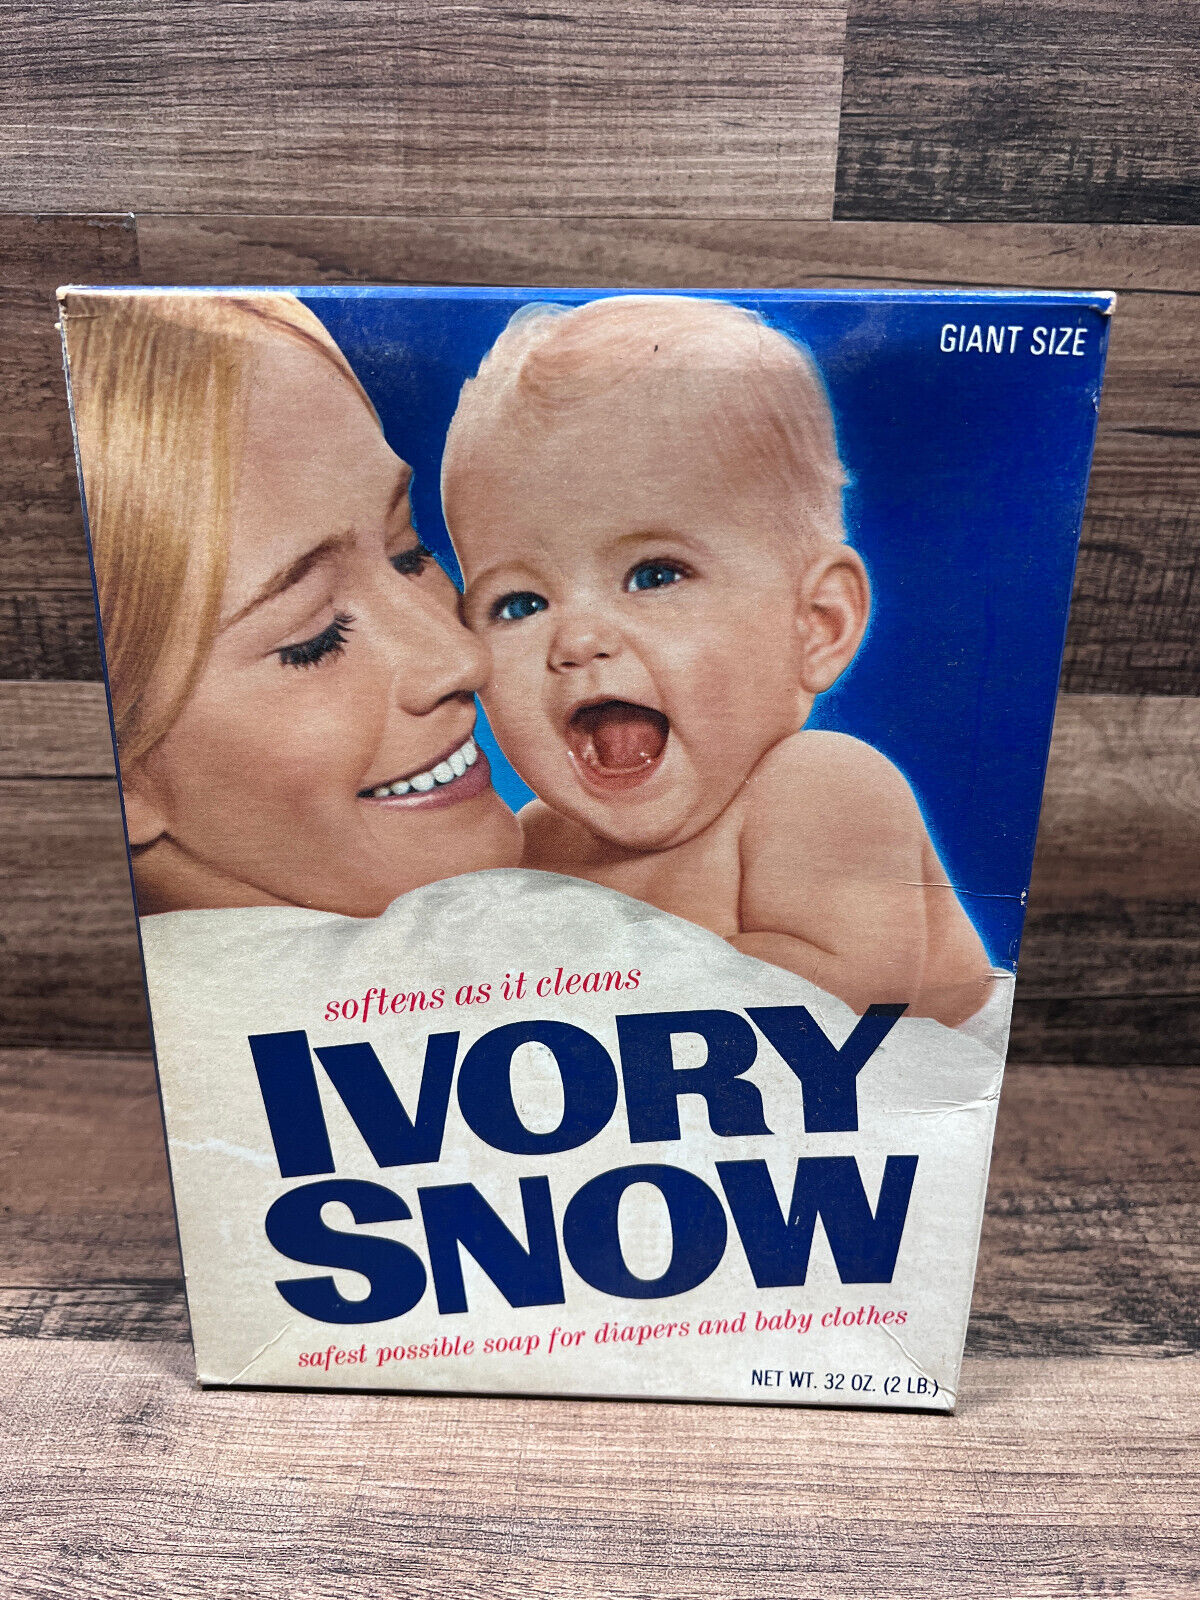 Vintage Ivory Snow Detergent Box Giant Size with Marilyn Chambers - RARE SIZE #1